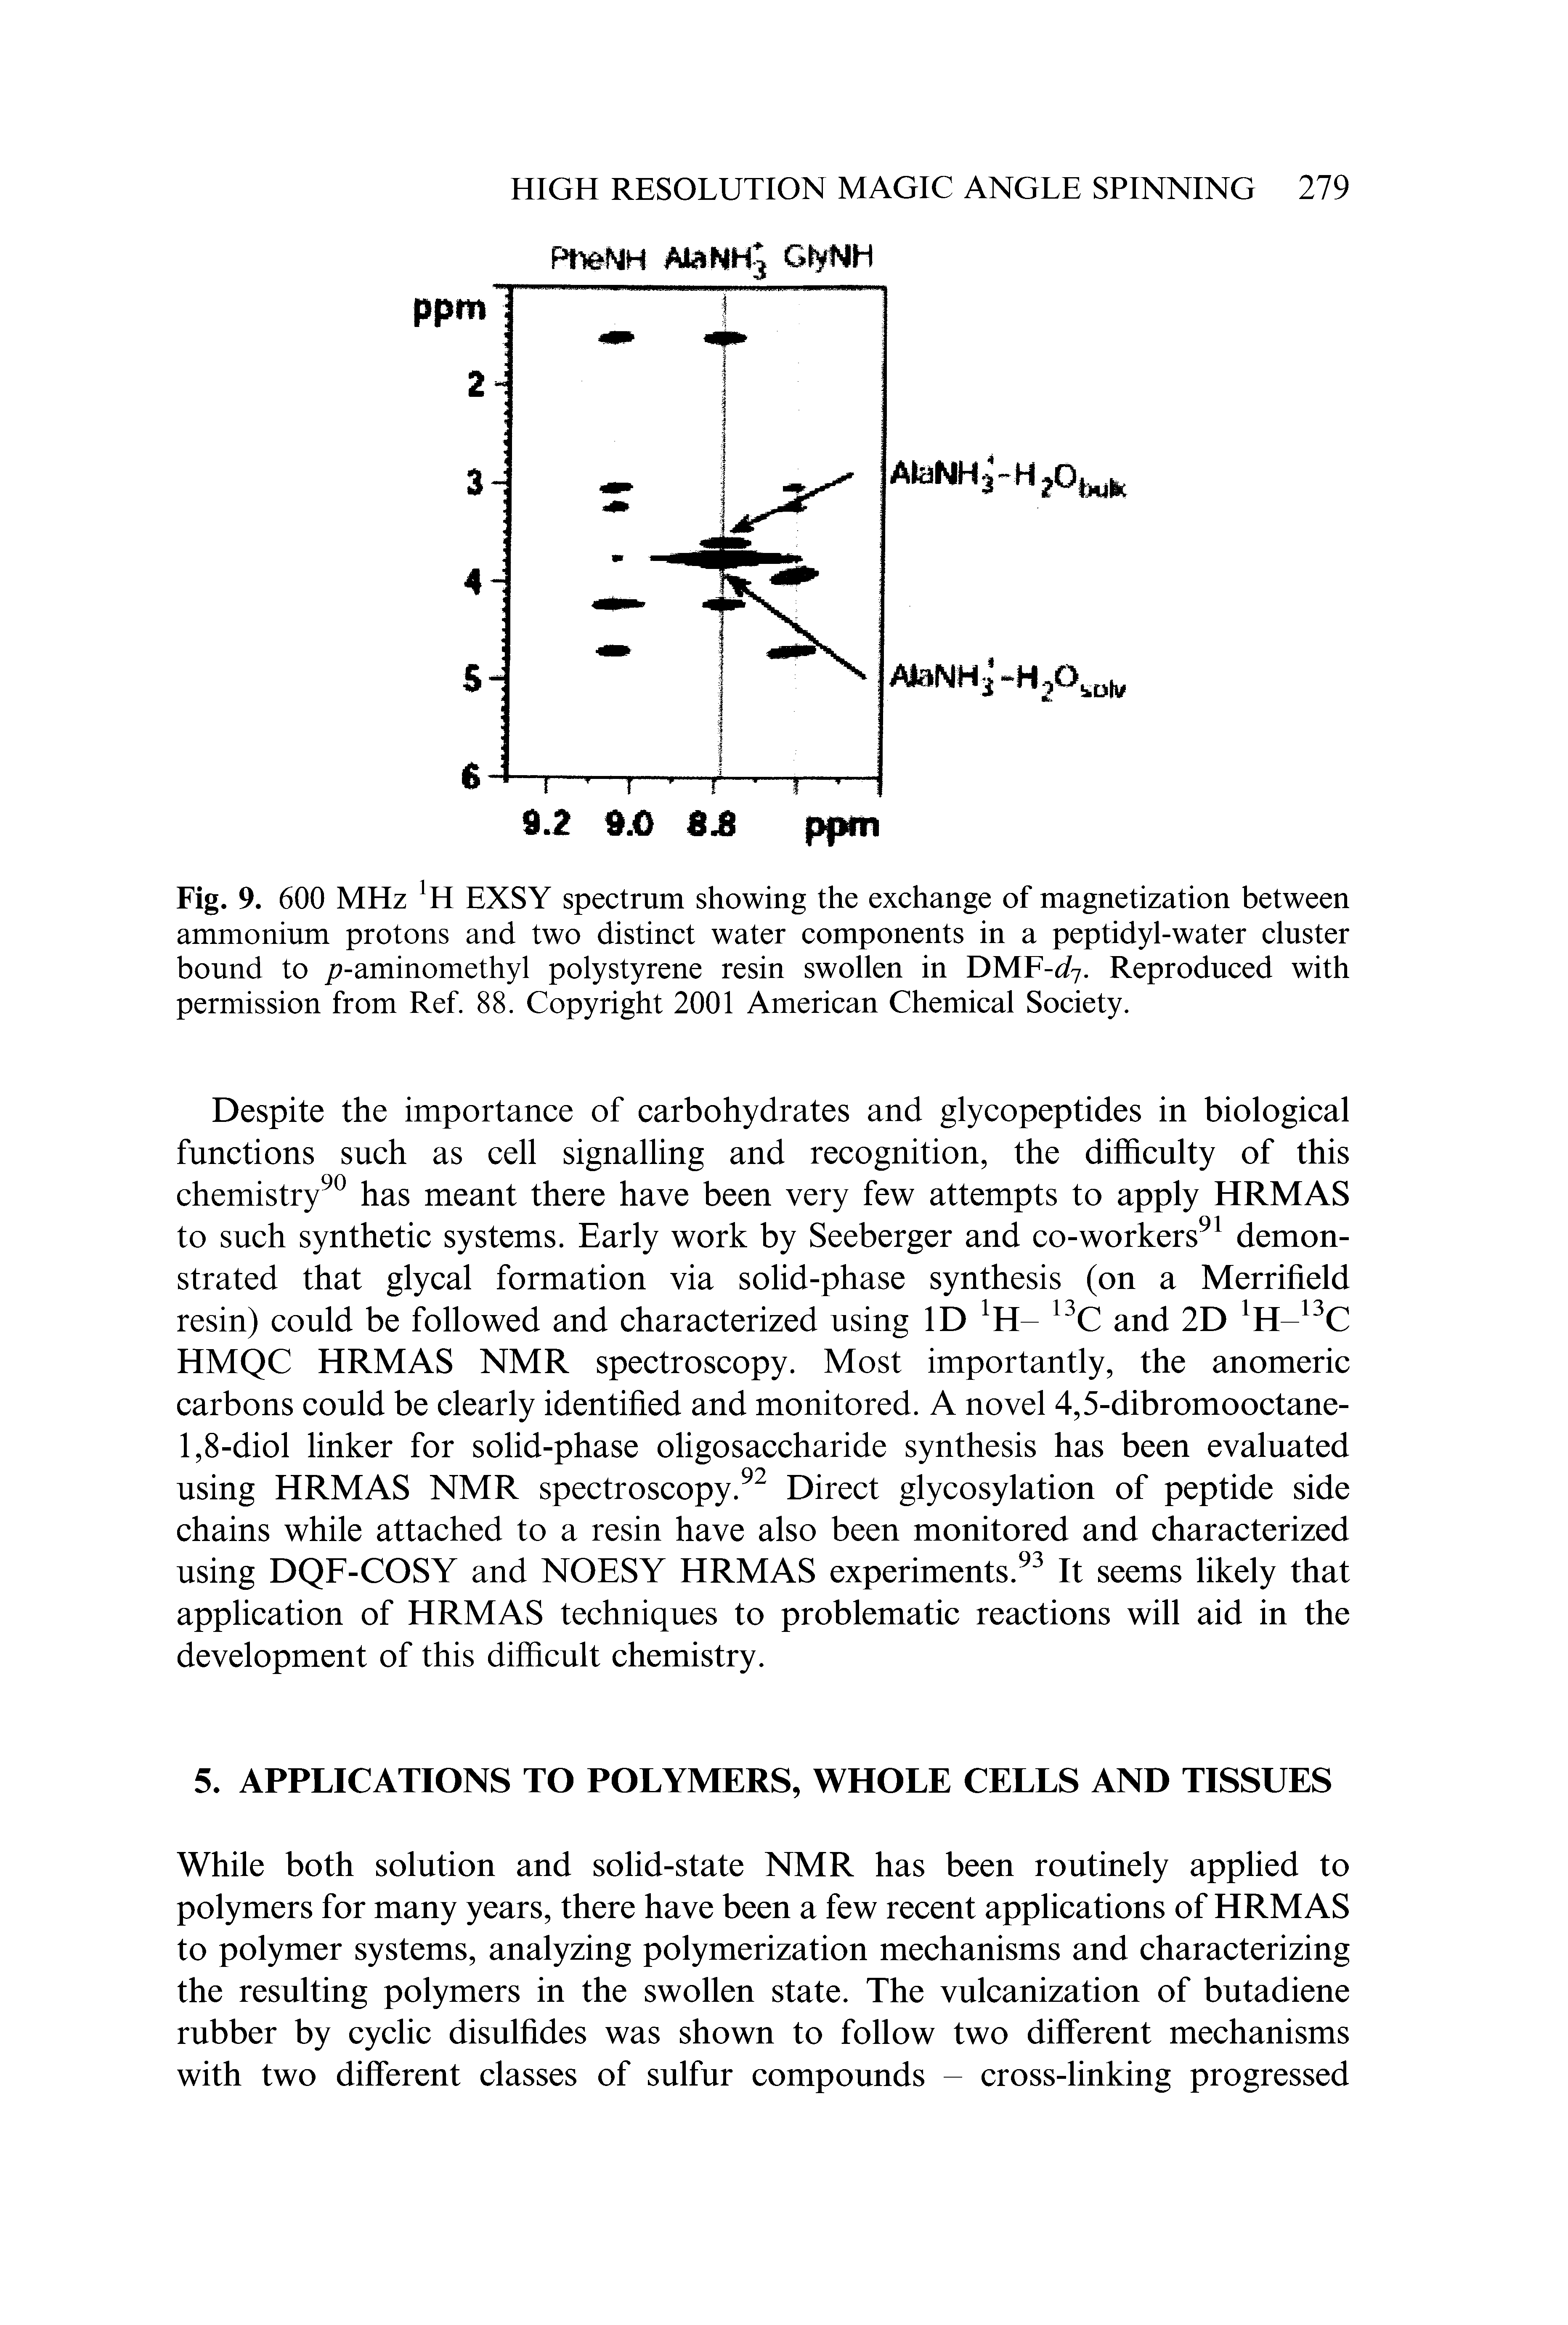 Fig. 9. 600 MHz EXSY spectrum showing the exchange of magnetization between ammonium protons and two distinct water components in a peptidyl-water cluster bound to -aminomethyl polystyrene resin swollen in DMF-d1. Reproduced with permission from Ref. 88. Copyright 2001 American Chemical Society.